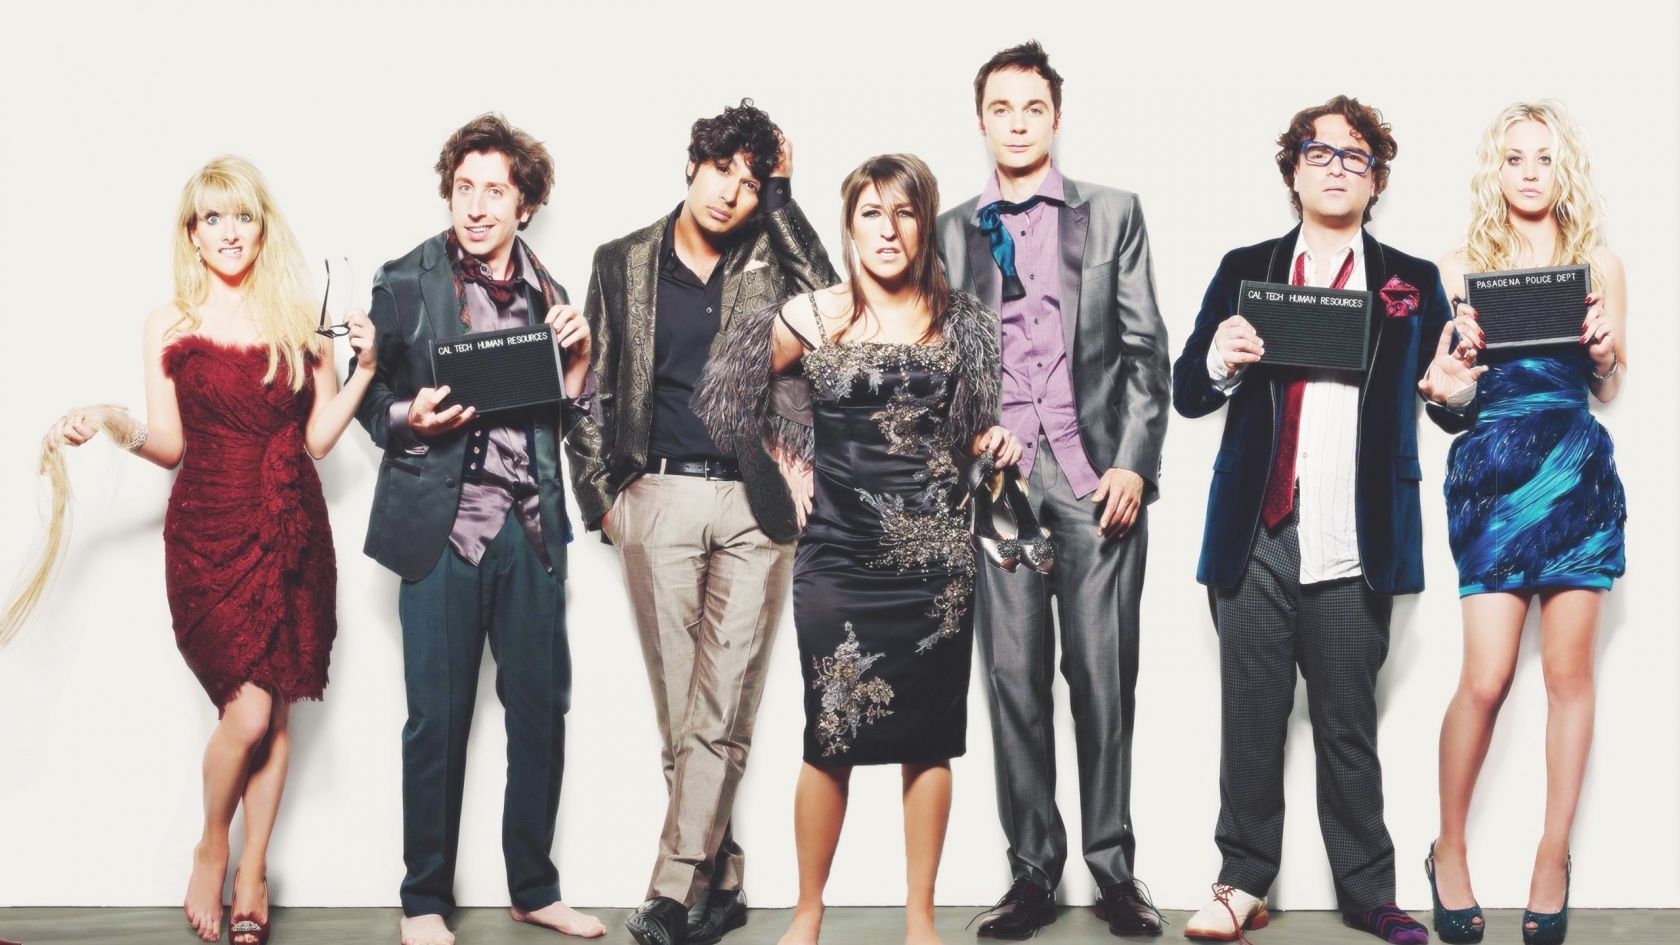 The Big Bang Theory Cast for 1680 x 945 HDTV resolution